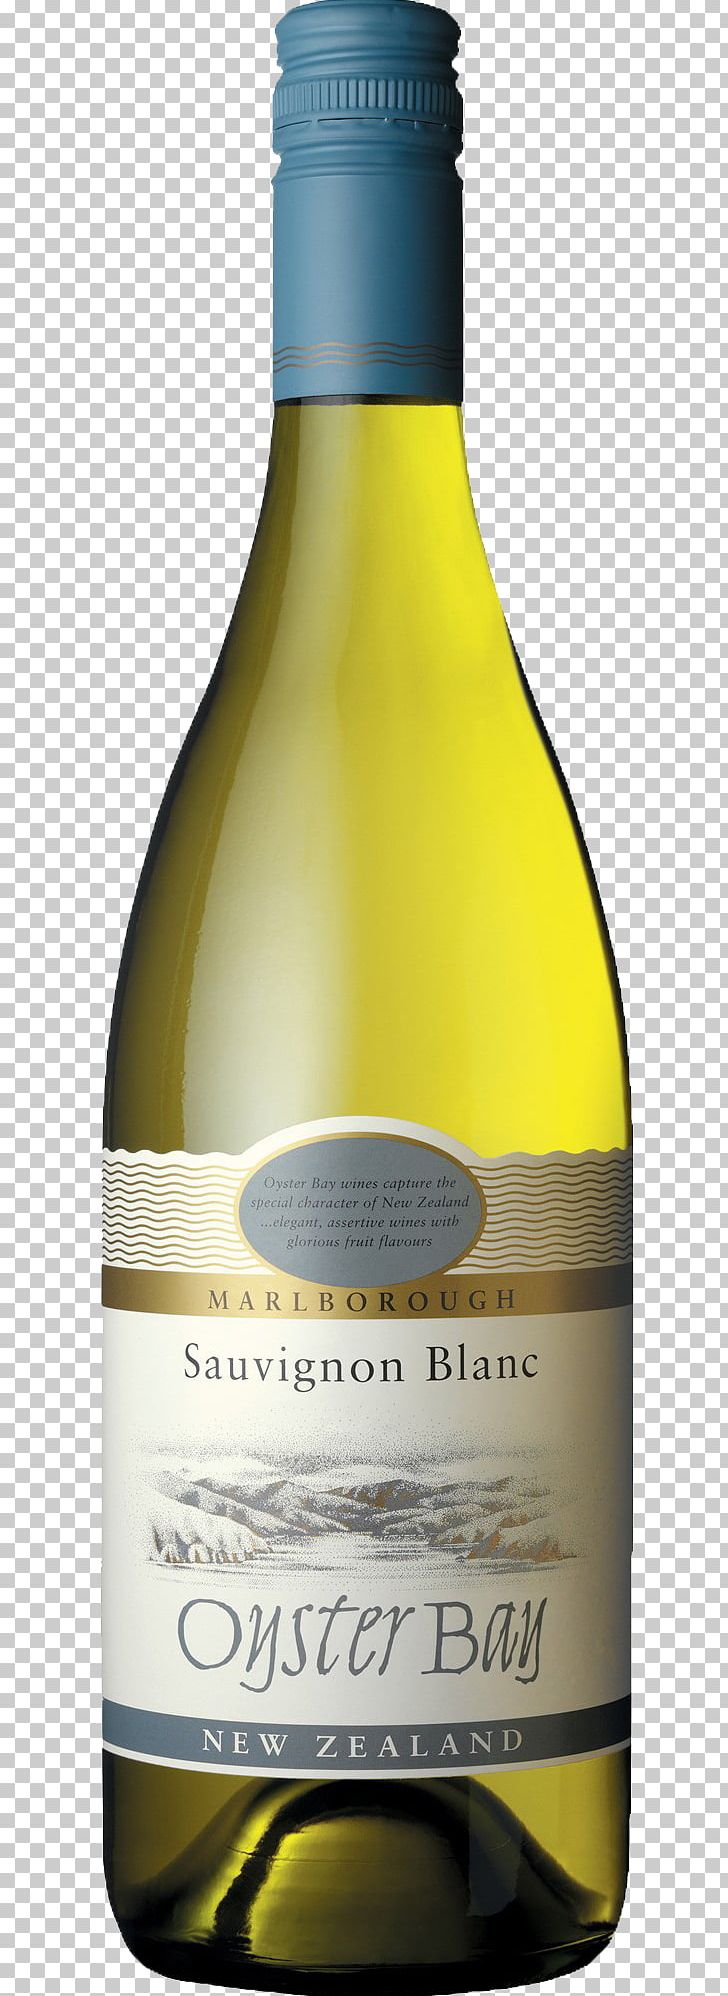 Sauvignon Blanc White Wine Oyster Bay Pinot Gris PNG, Clipart, Alcoholic Beverage, Alcoholic Drink, Bottle, Common Grape Vine, Distilled Beverage Free PNG Download